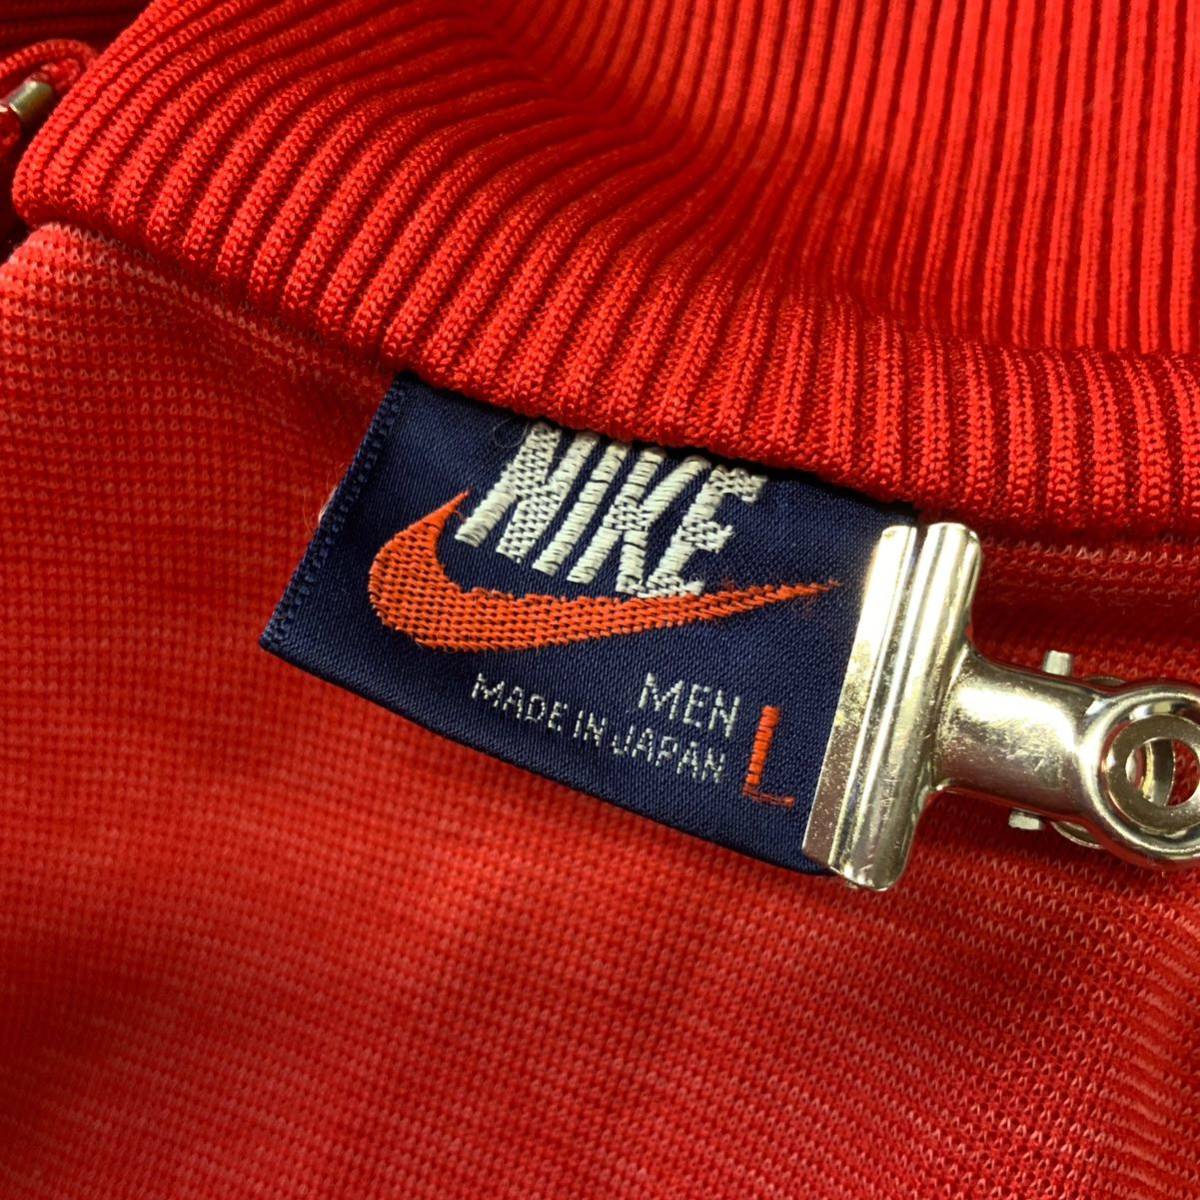  rare superior article 80*s navy blue tag NIKE Nike truck top jersey men's L size red Vintage Vintage made in Japan 